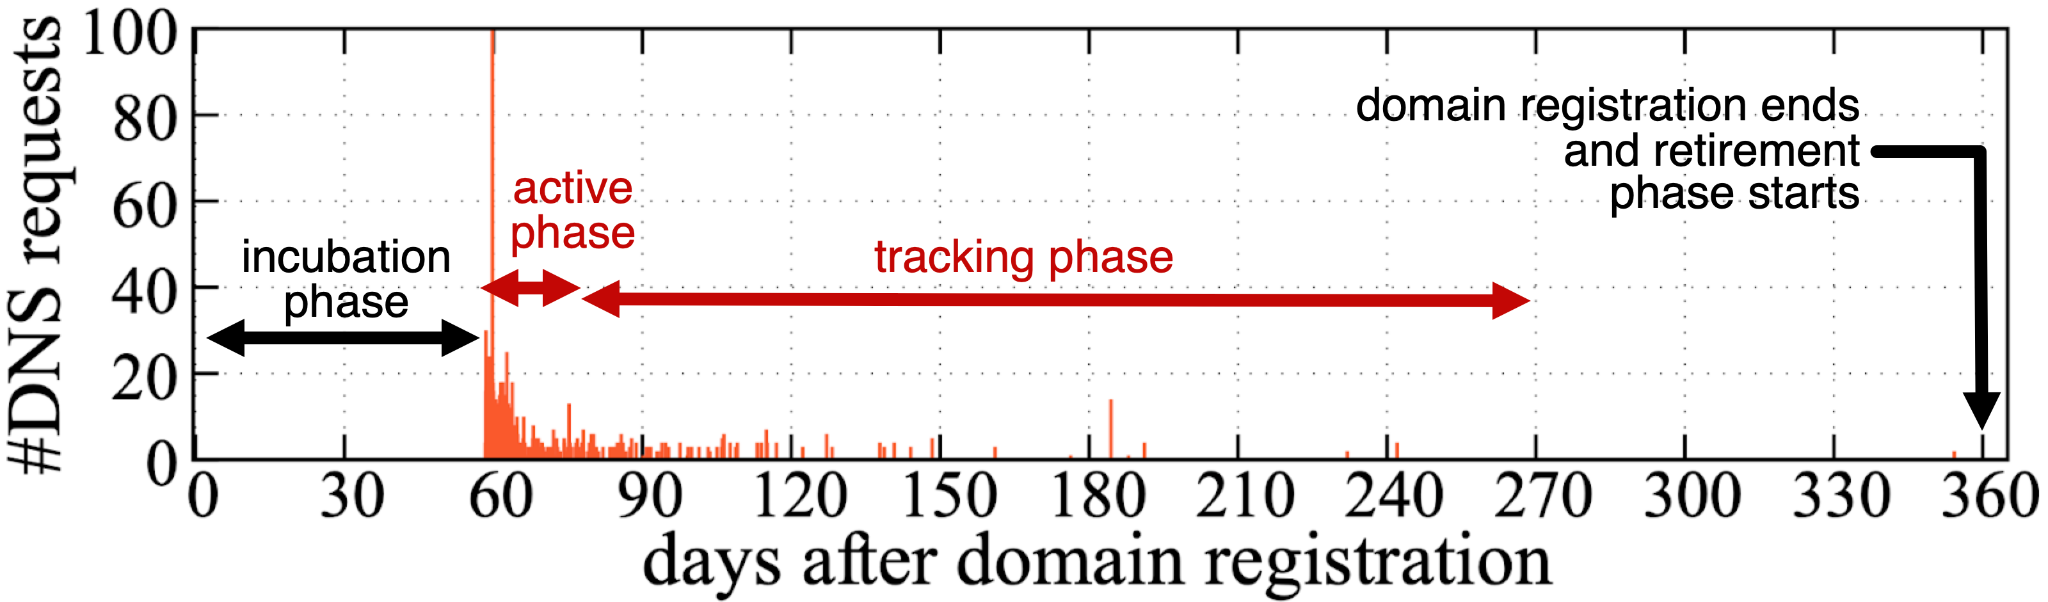 Image 3 is a graph of the life cycle of a specific domain. The incubation phase lasts 60 days. The active phase starts shortly after. The tracking phase extends to day 270 and the domain registration ends and the retirement phase starts on day 360. 